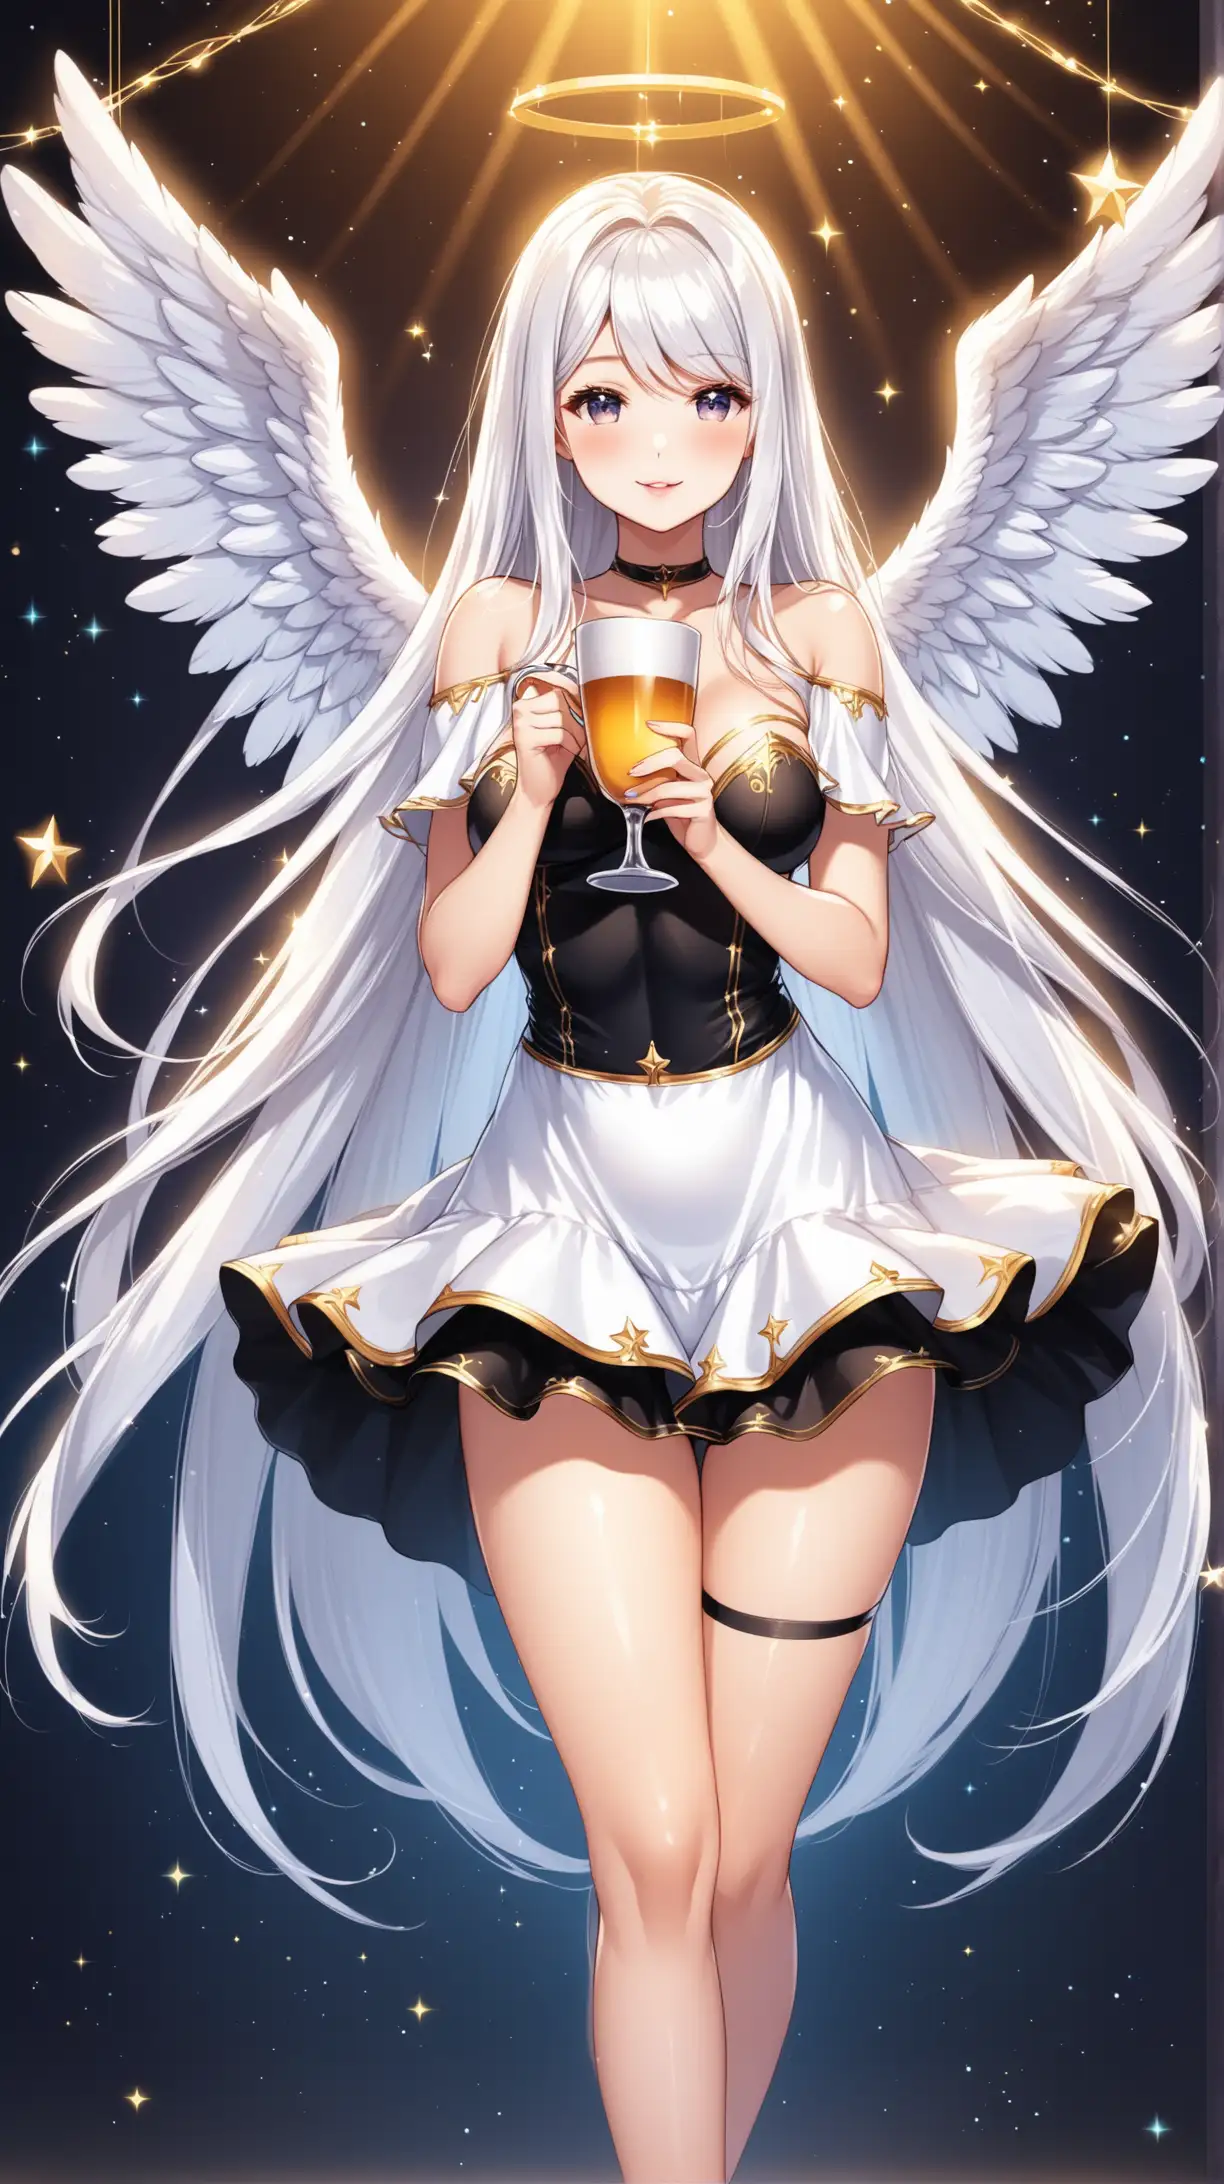 Sexy women carry cup , angel costume, playful, white long hair, black short sexy dress, fantastic background .